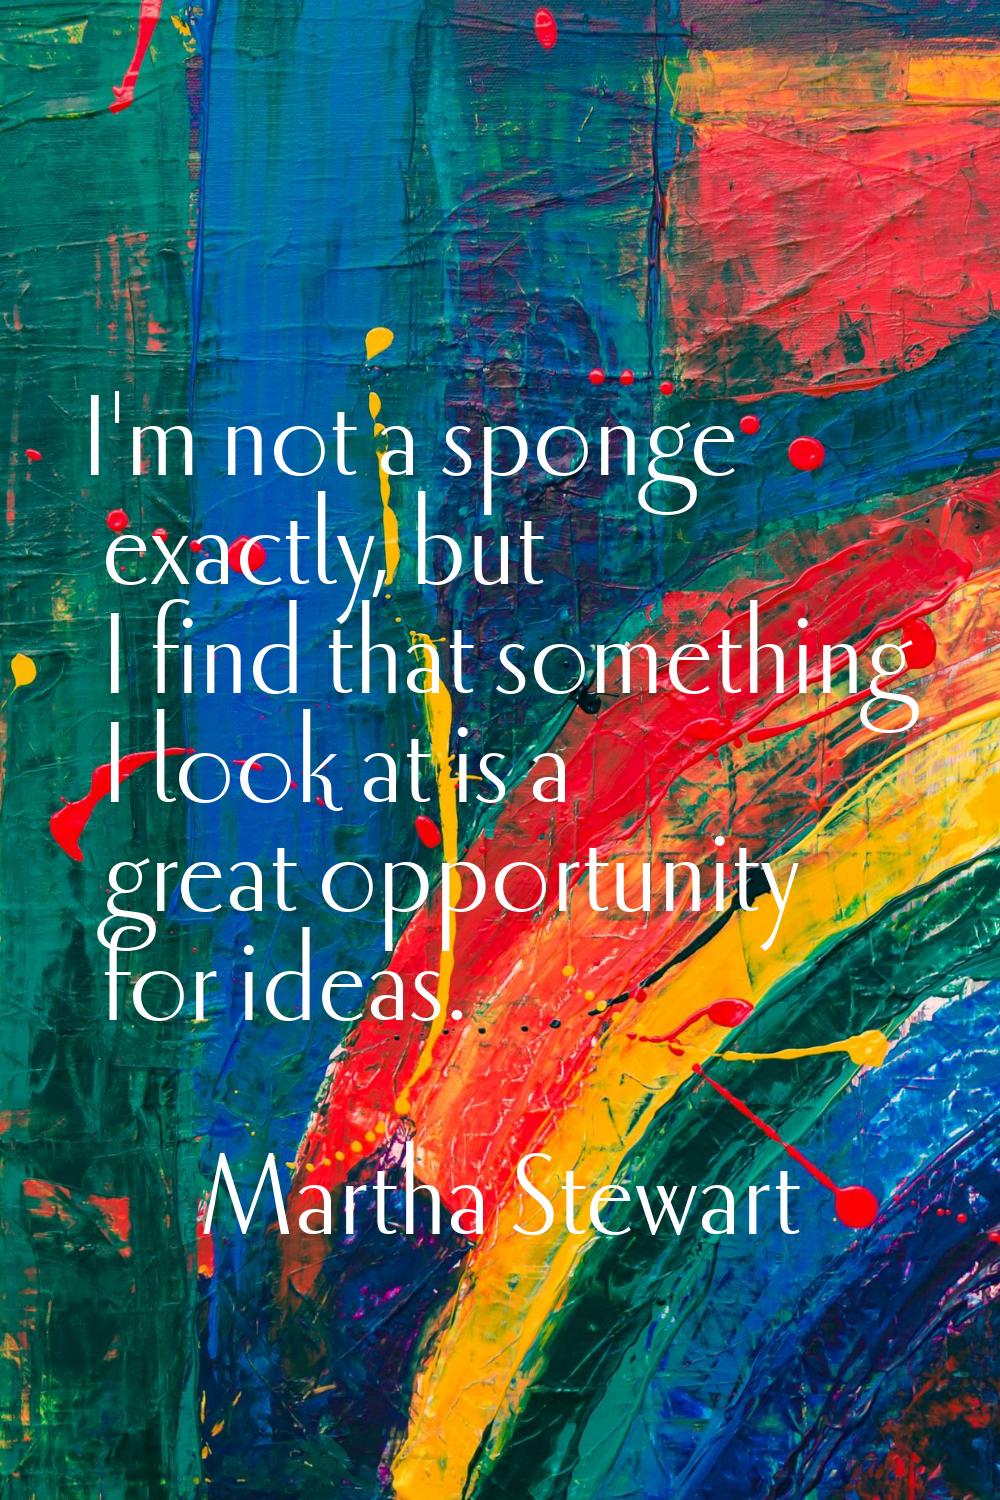 I'm not a sponge exactly, but I find that something I look at is a great opportunity for ideas.